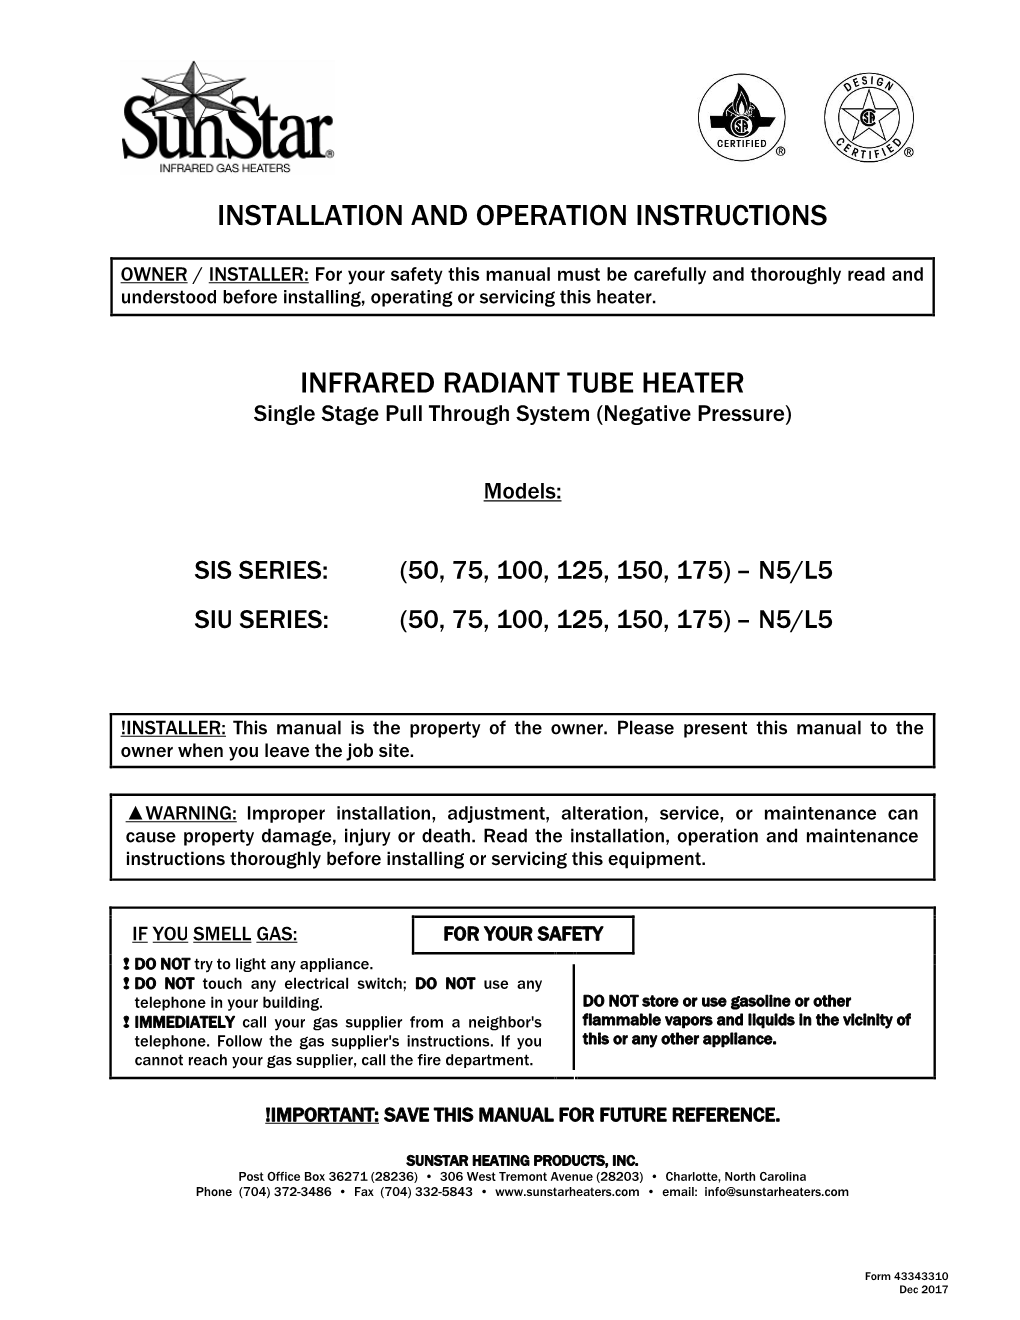 Installation and Operation Instructions Infrared